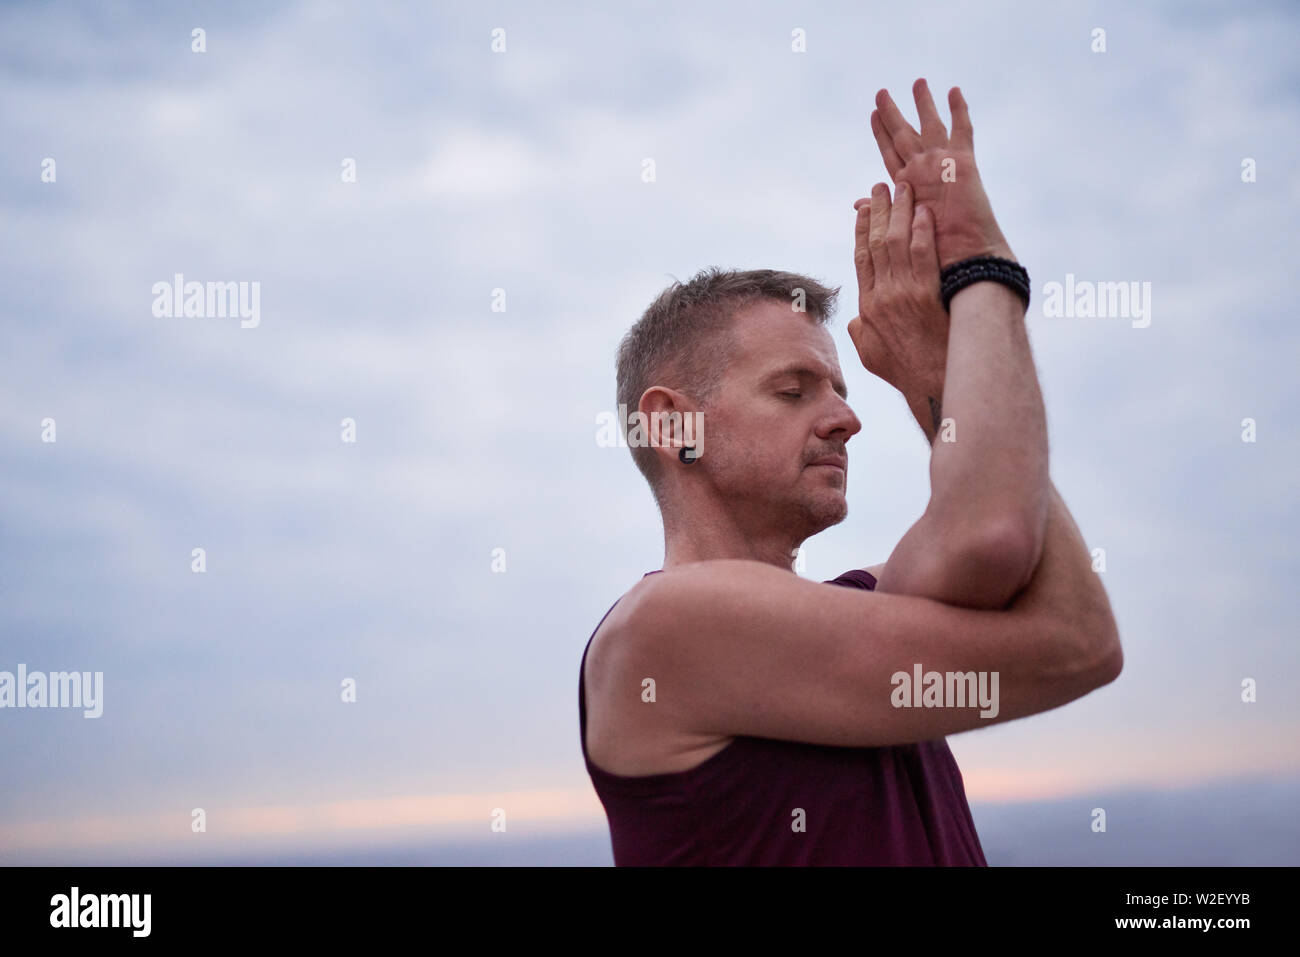 Man doing the eagle pose by the oceanat dusk Stock Photo